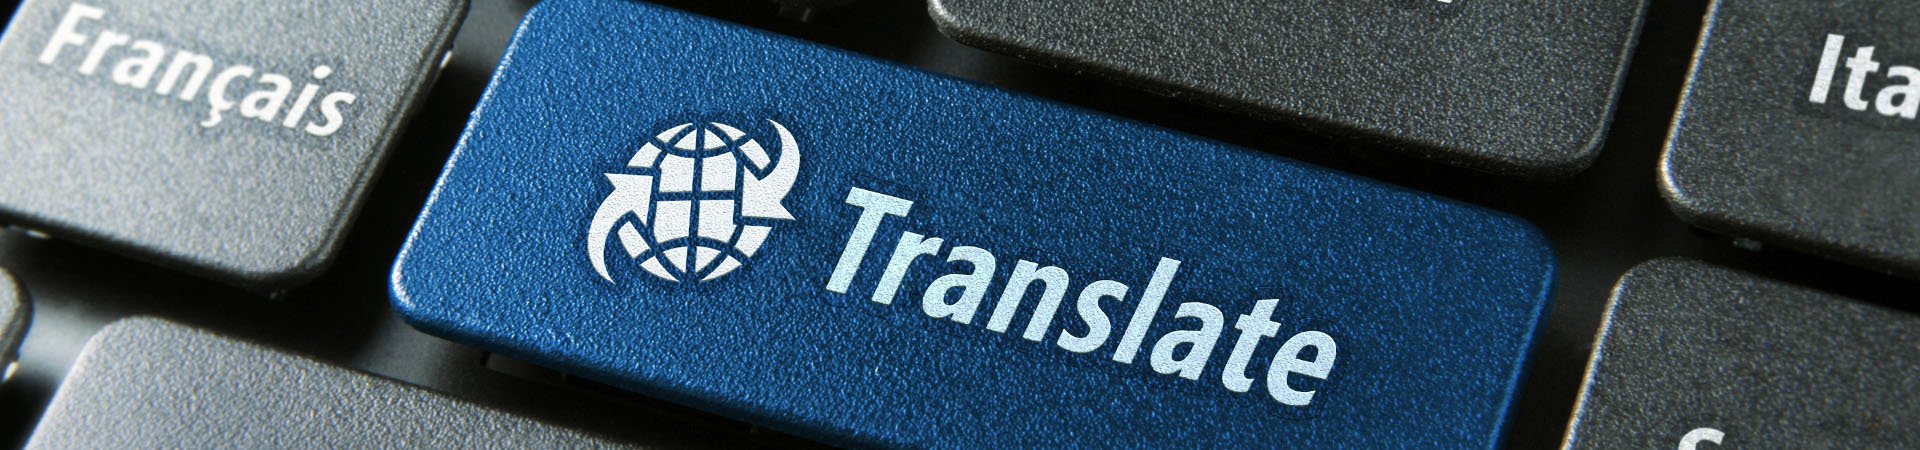 Refactoring and Migrating a Large Translation App from VB.NET to C#